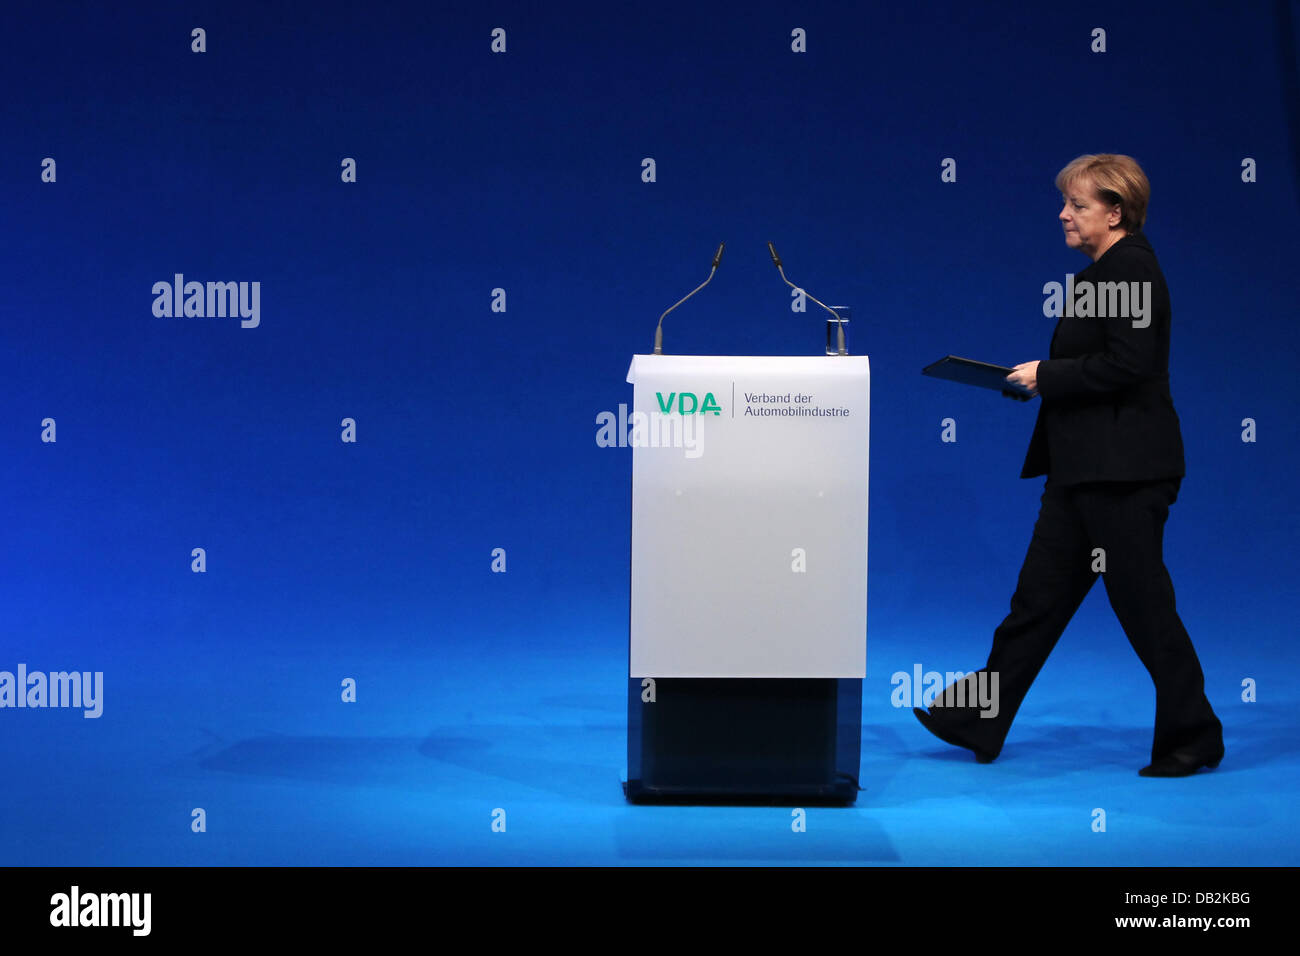 German chancellor Angela Merkel walks to the lecturn during the official opening ceremony of the International Motor Show IAA in Frankfurt Main, Germany, 15 September 2011. From 15 to 25 September 2011 exhibitors from all over the world will present new trends of the automotive industry, headed by electronic mobility and hybrid vehicles. Photo: FREDRIK VON ERICHSEN Stock Photo